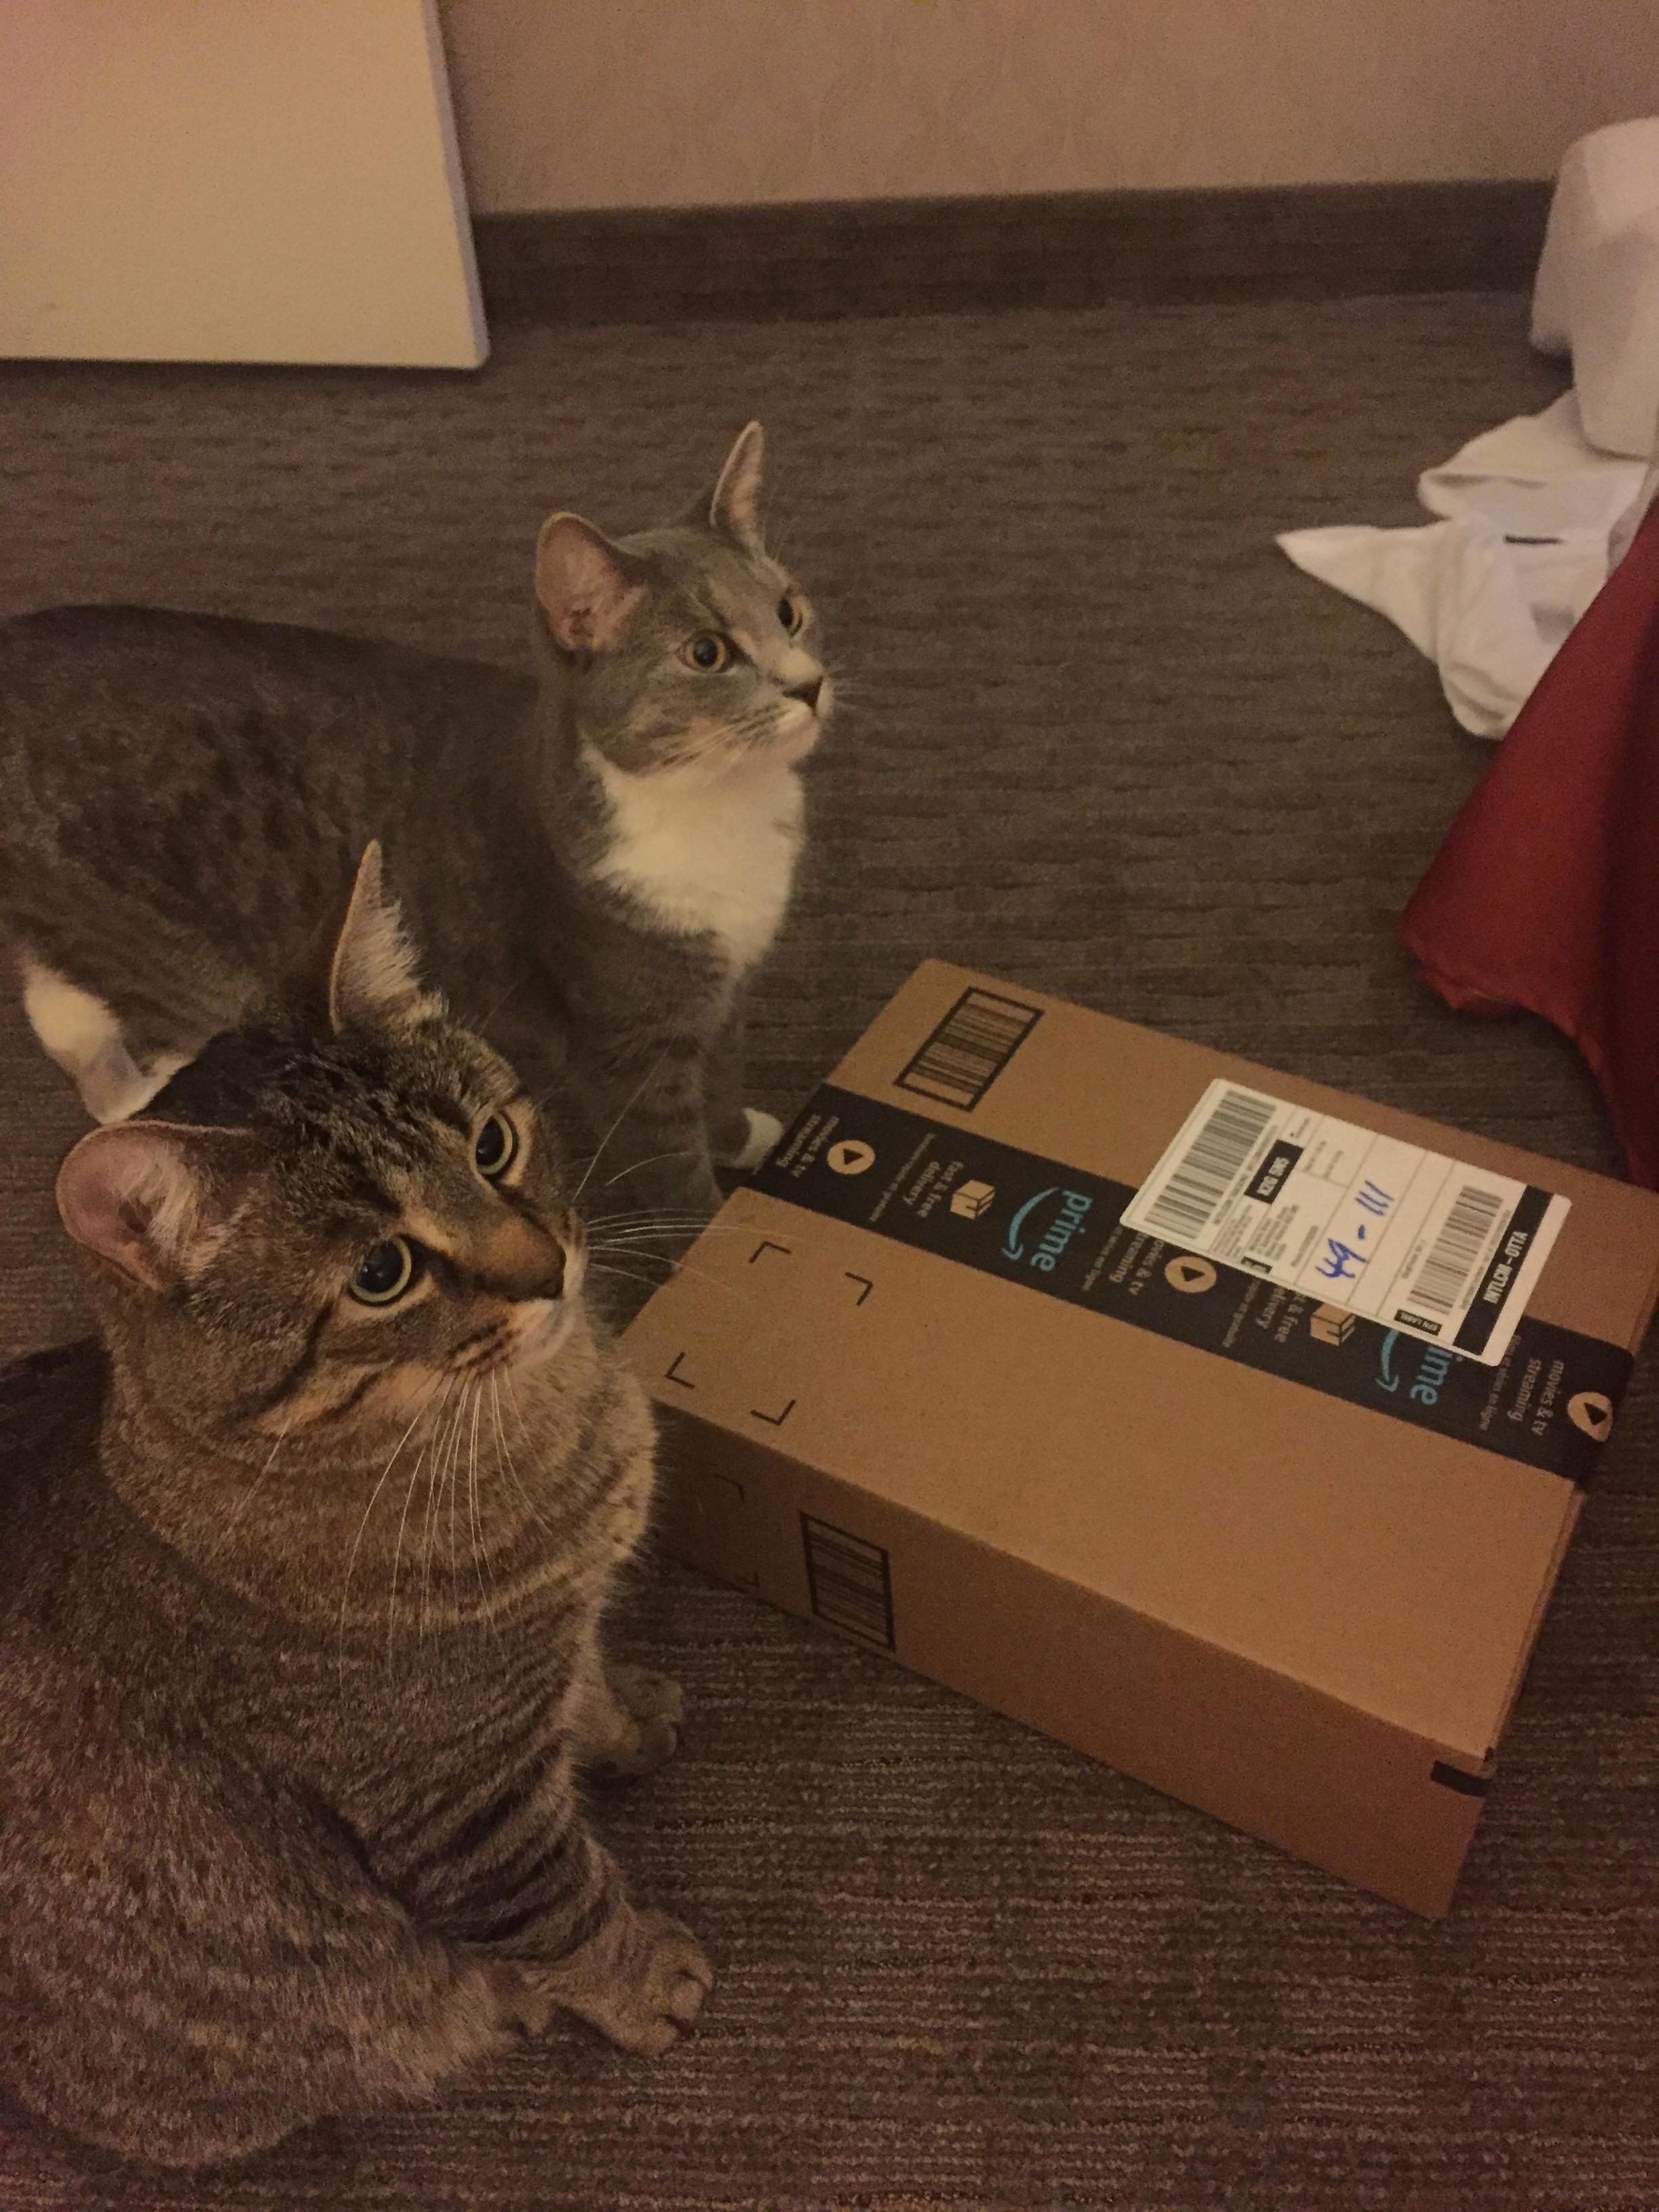 Today is my husbands birthday. miguel and misty eagerly waited to give him his gift this morning (even if it was just to get the box)